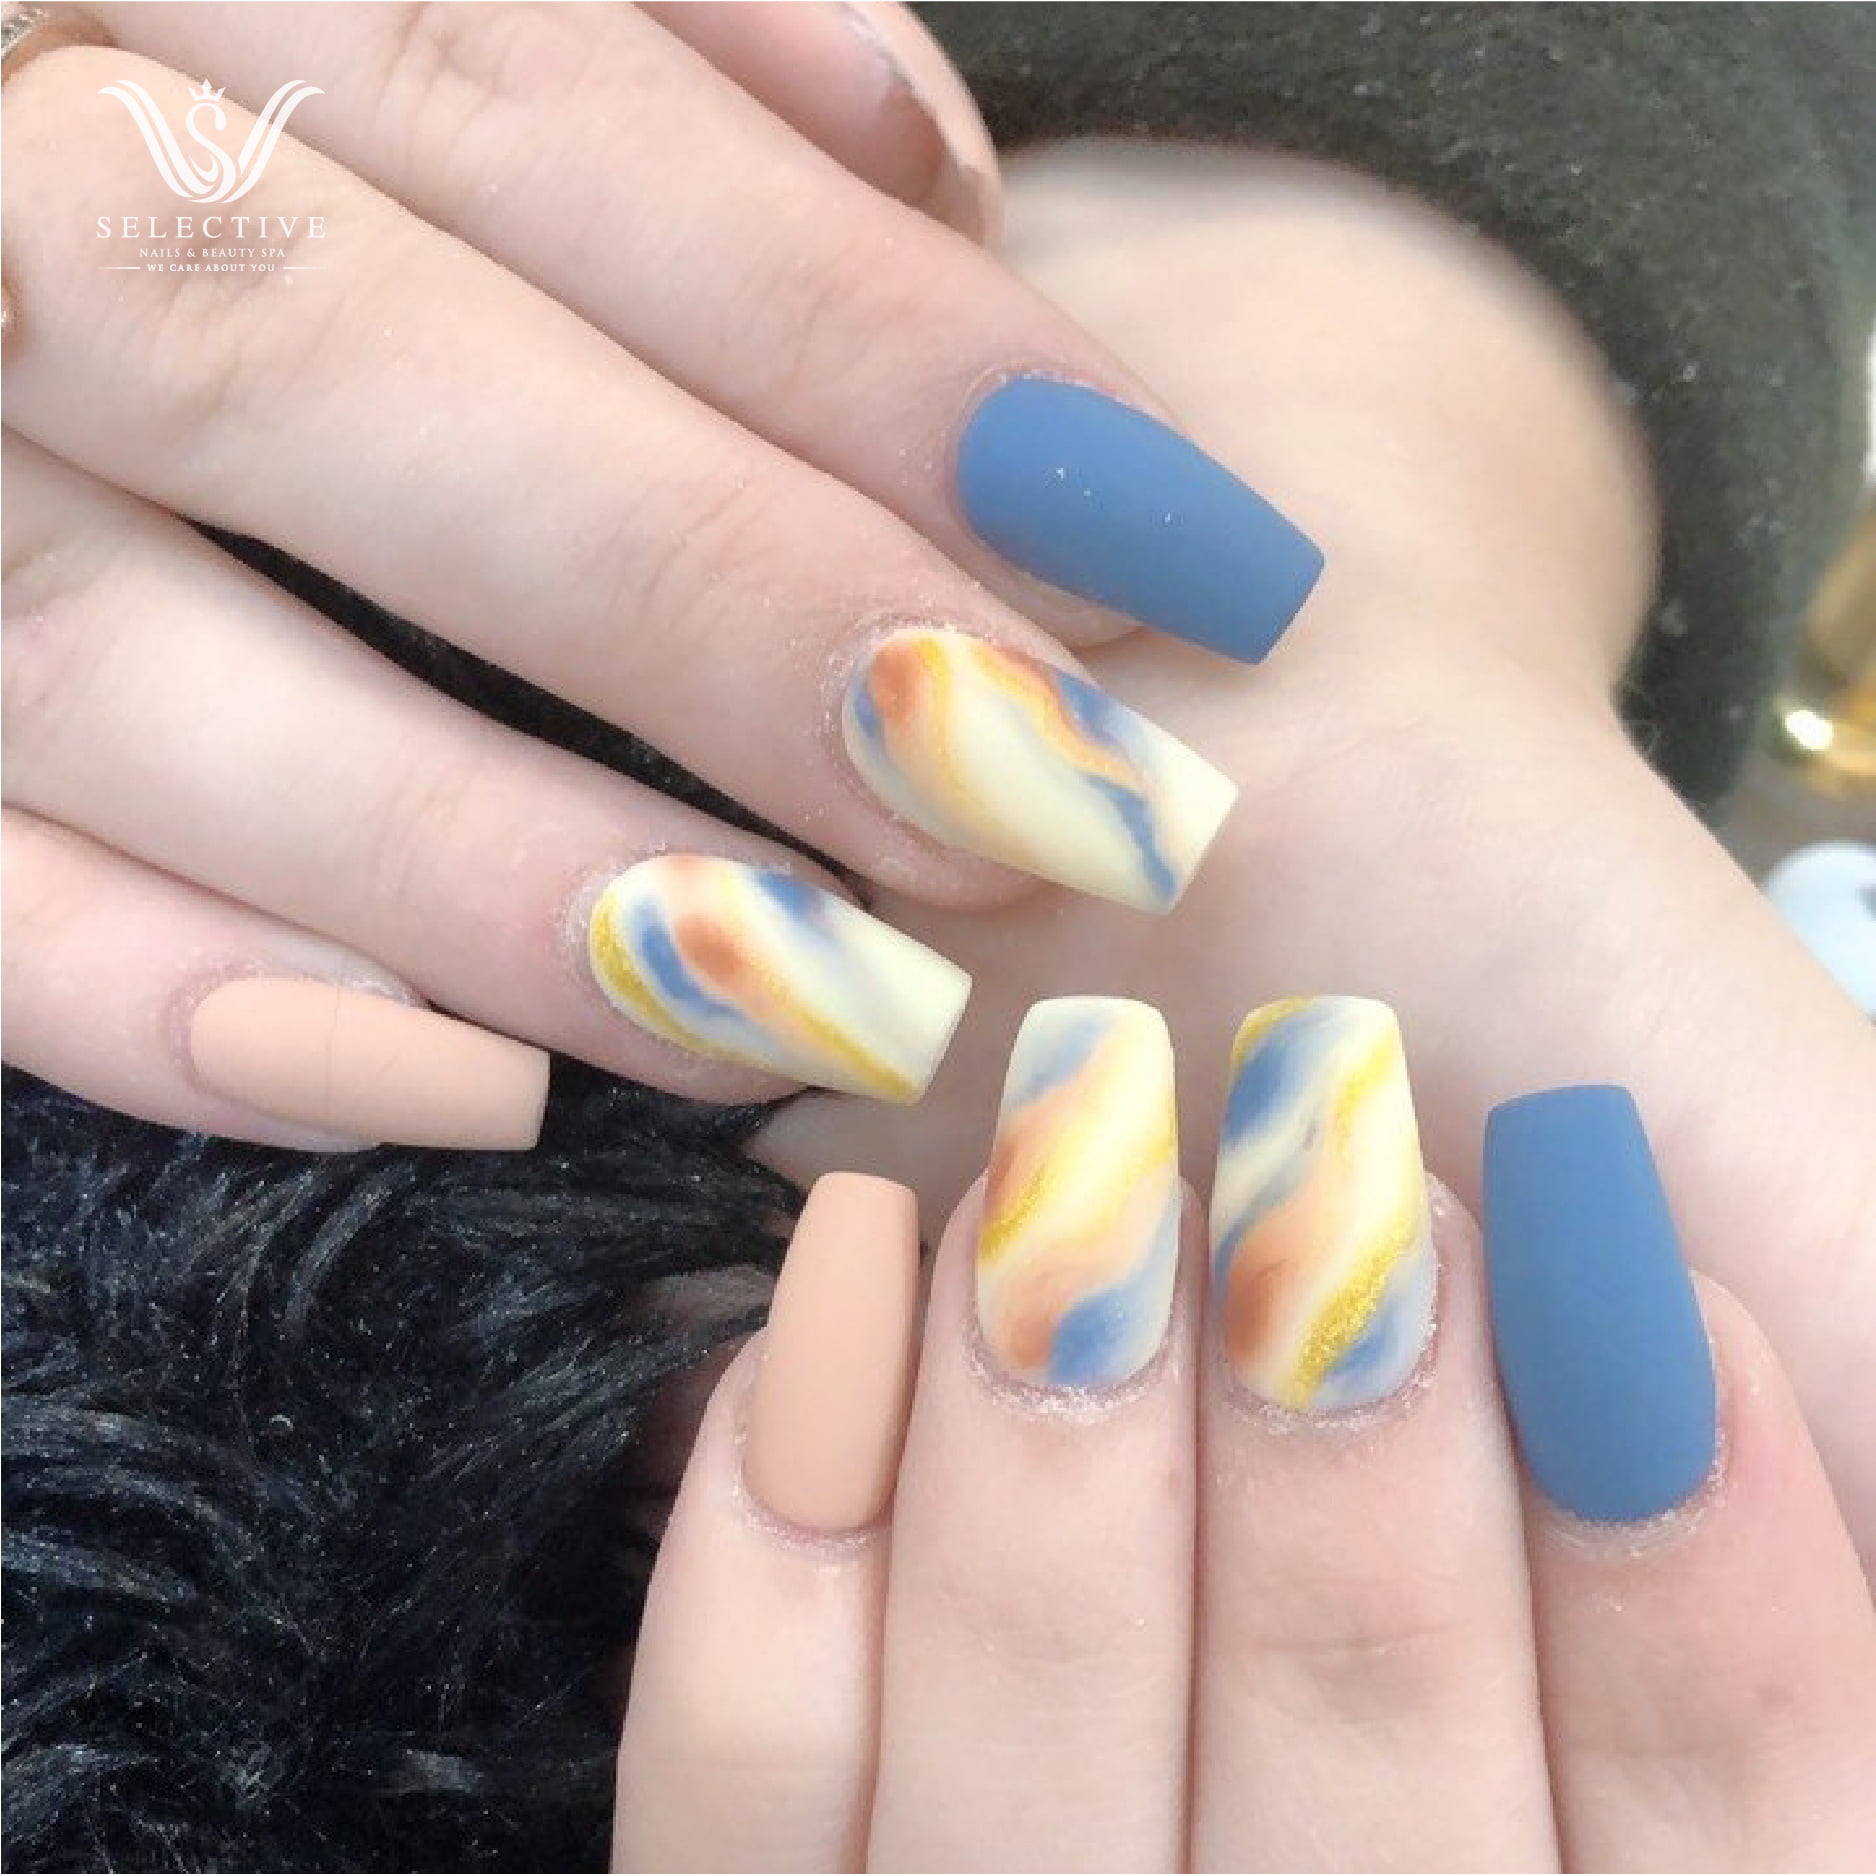 Manicure nail ideas with something new